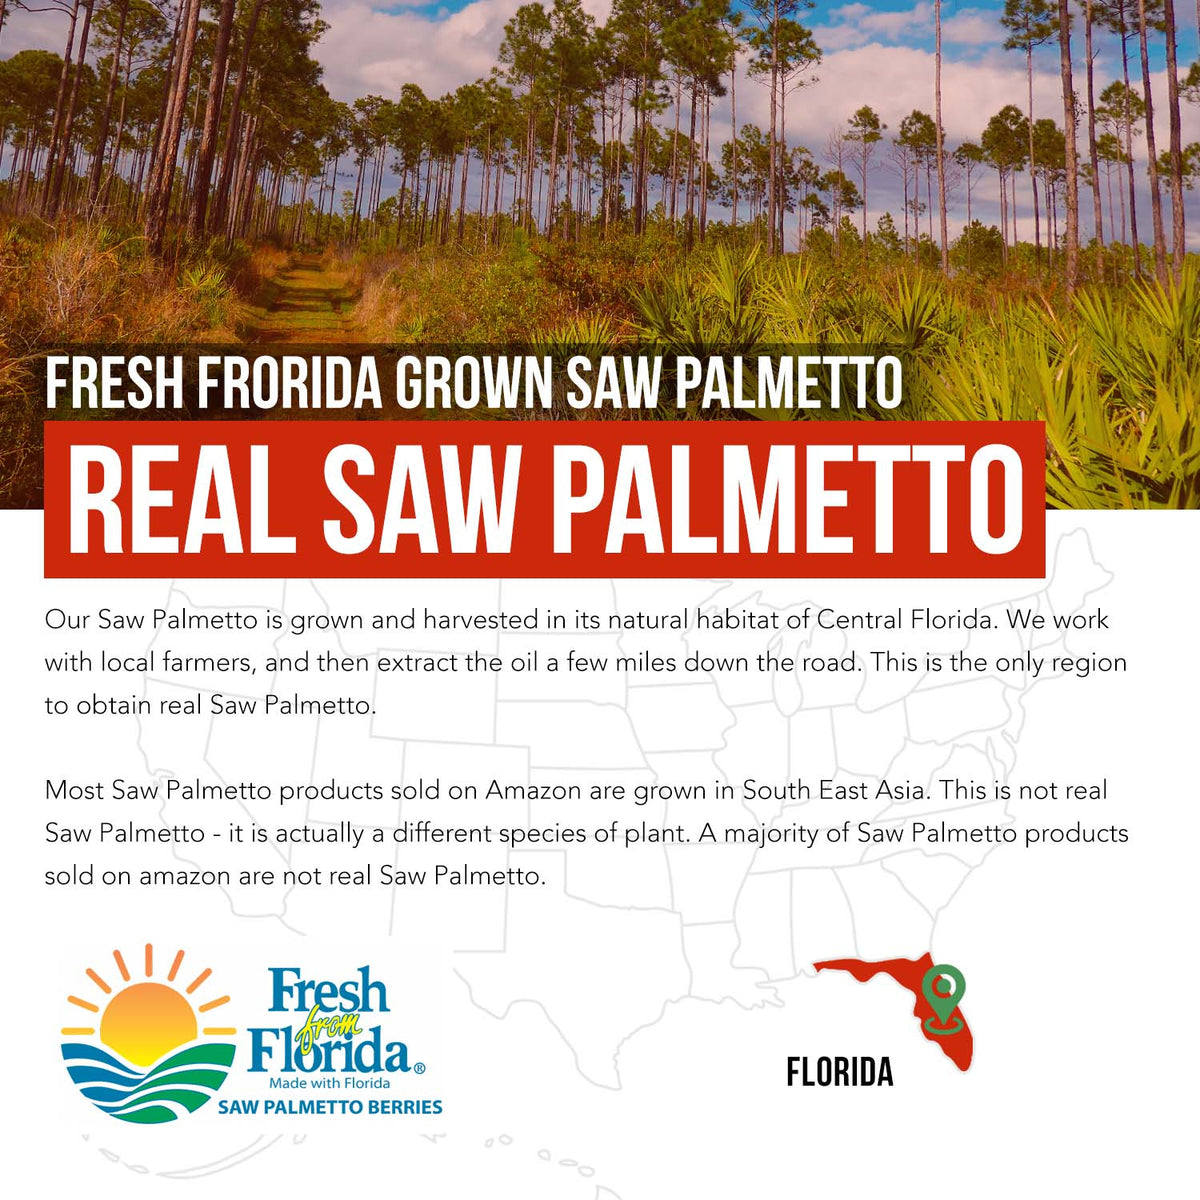 Saw Palmetto Extract with Pumpkin Seed Oil